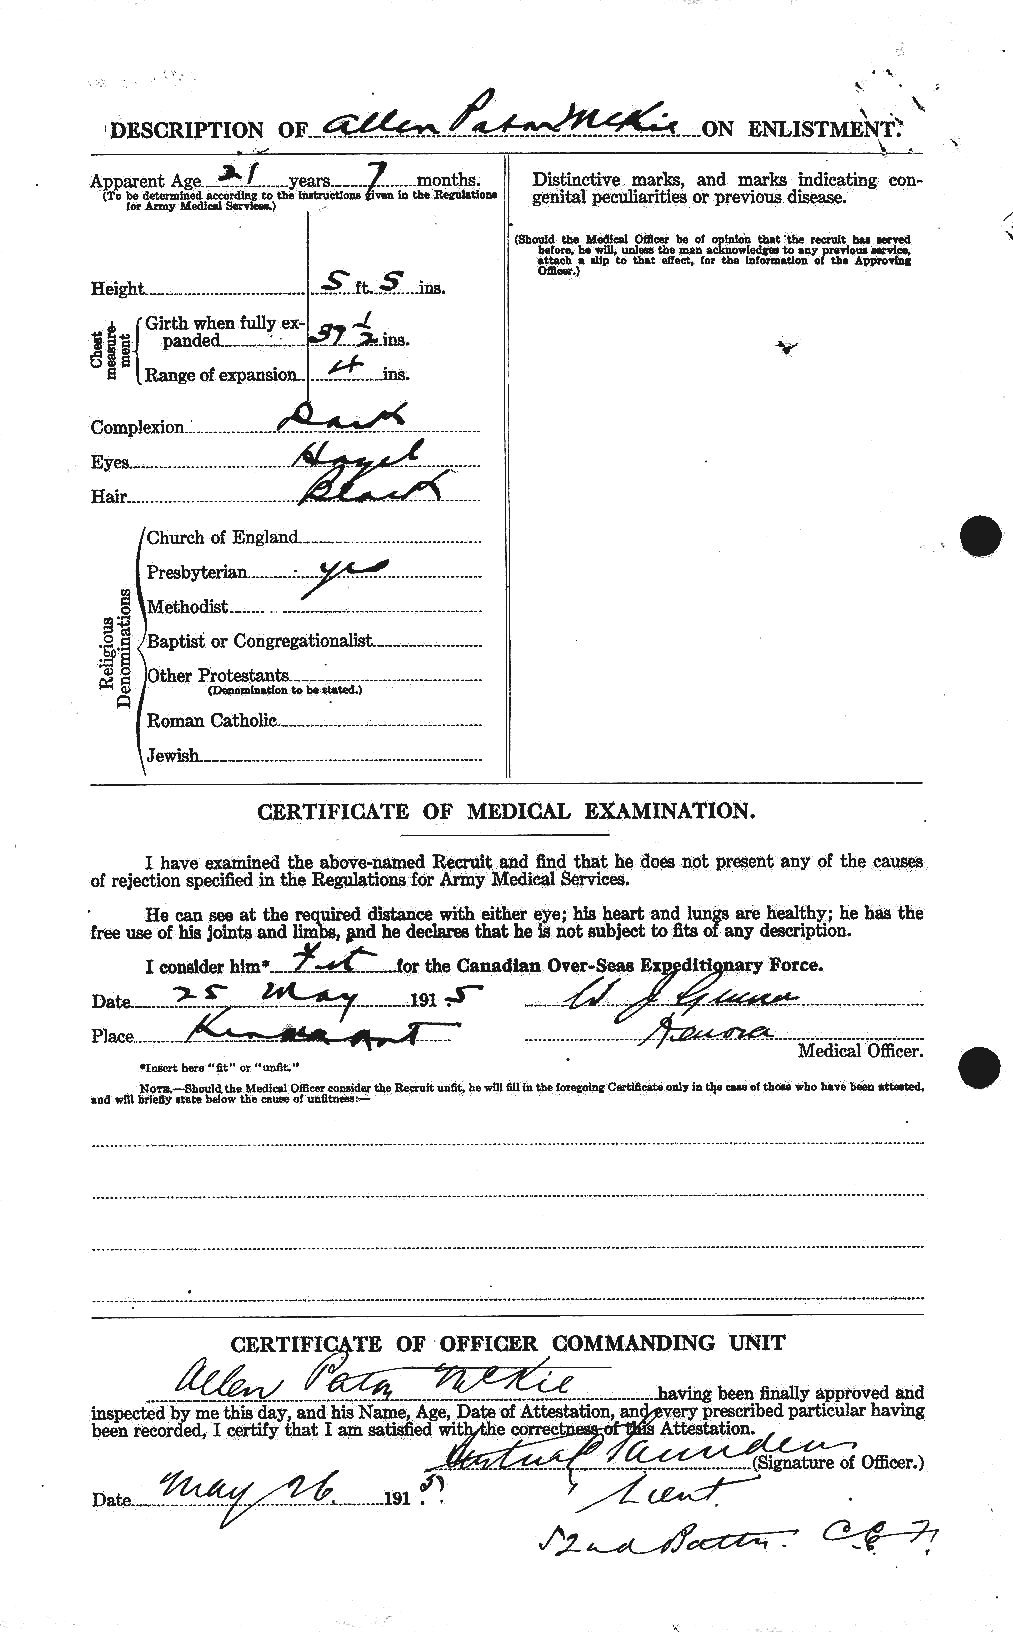 Personnel Records of the First World War - CEF 533731b